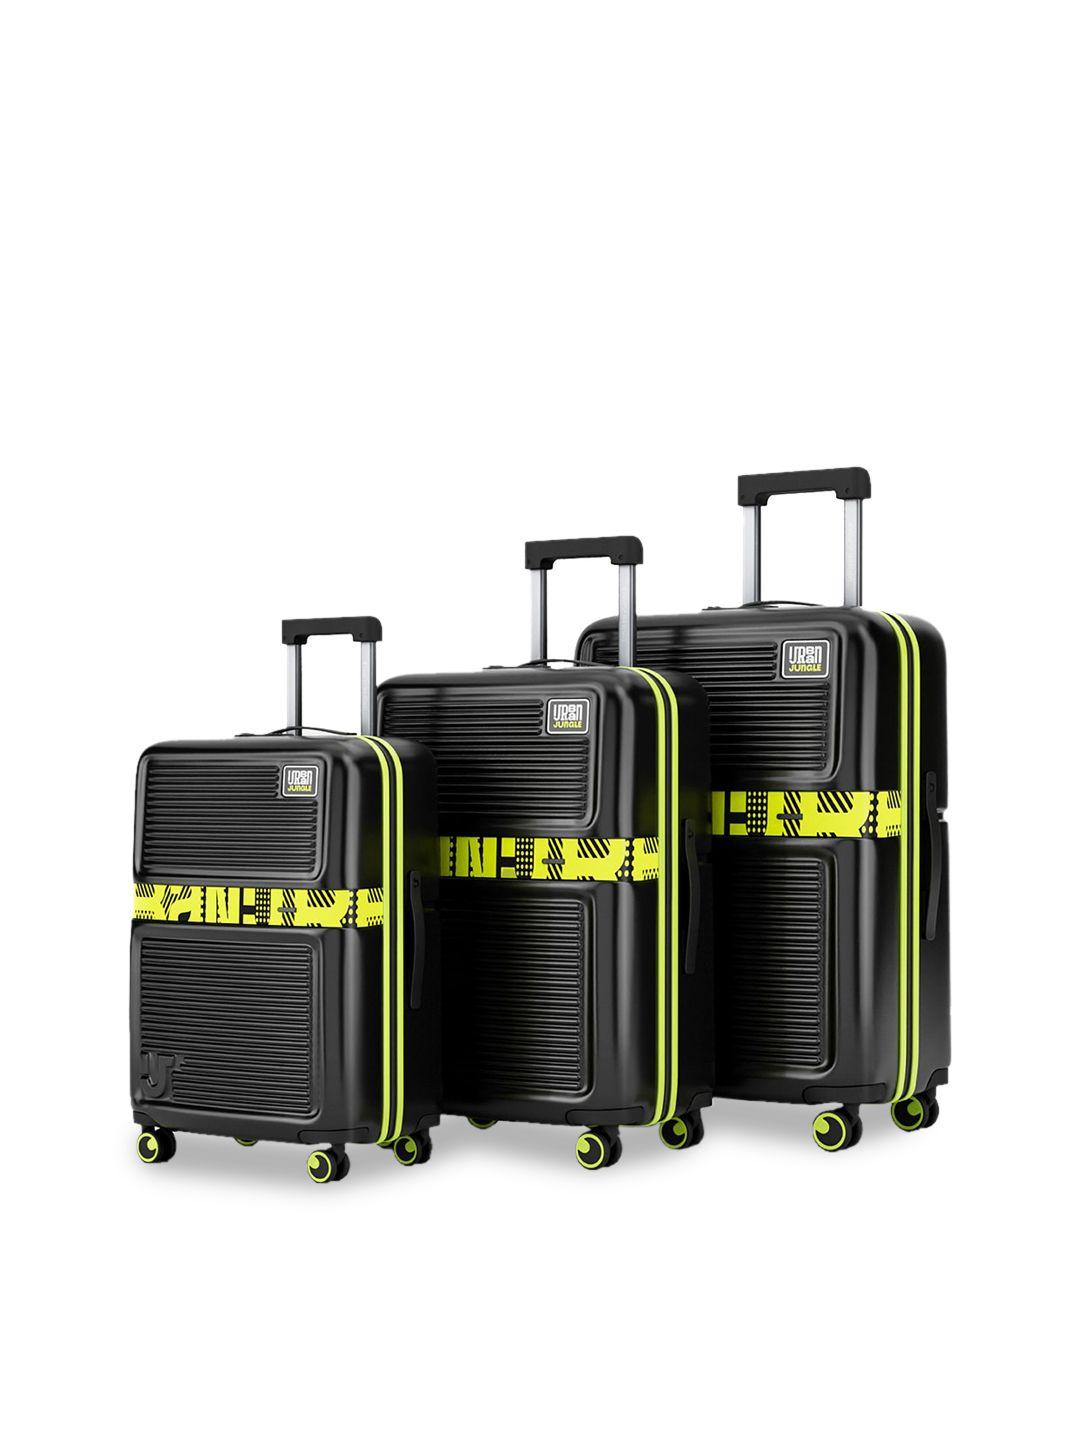 urban jungle set of 3 textured hard sided trolley suitcase